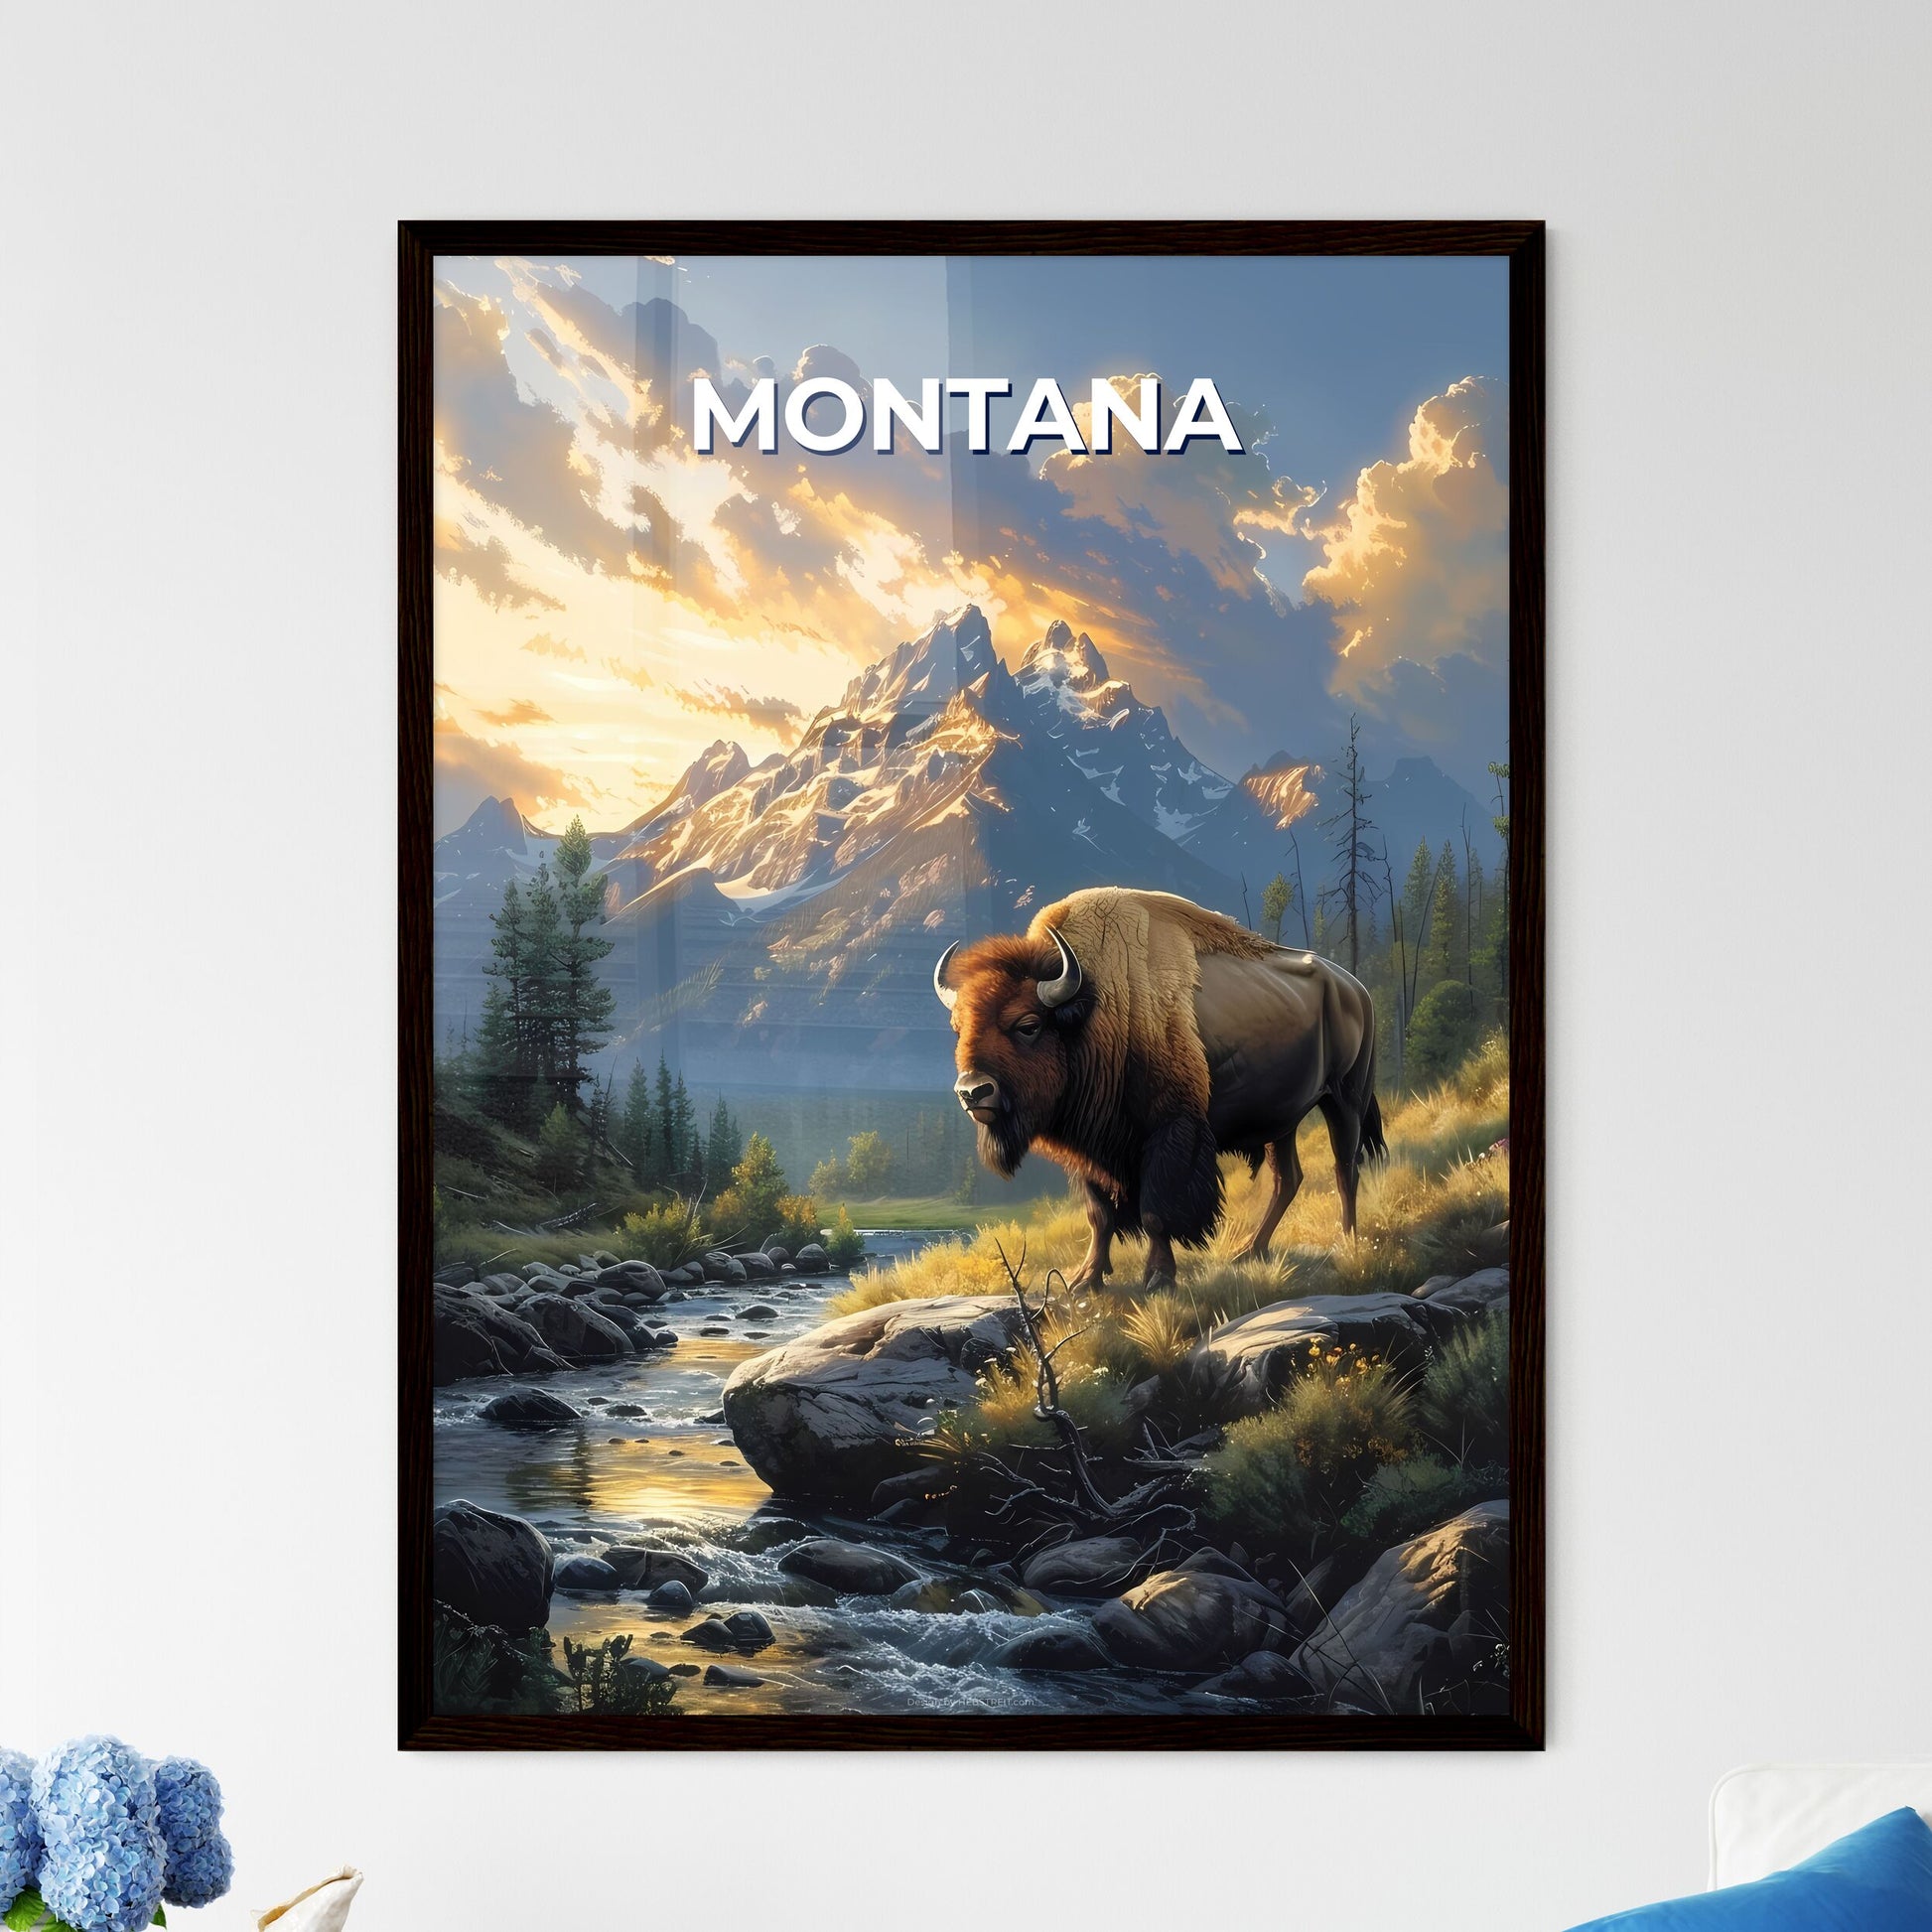 Vibrant Digital Painting: Majestic Bison Posing on Rocks Amidst River's Edge in Montana